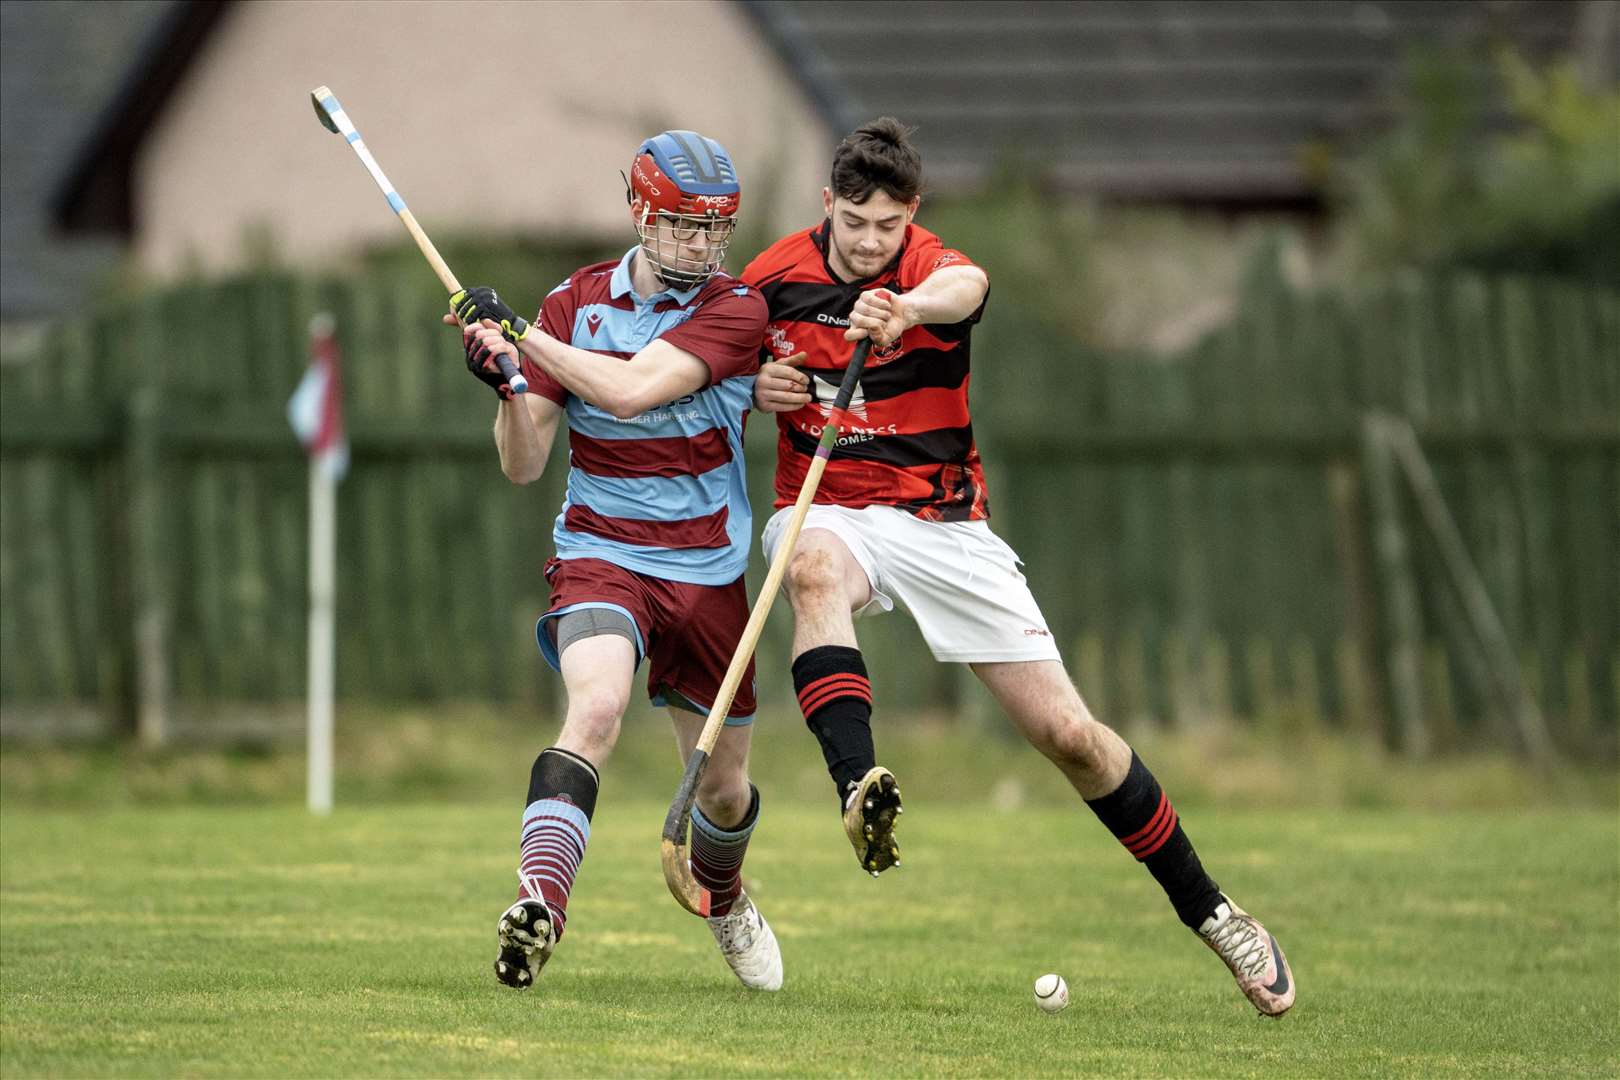 Ruairidh Strachan (Strathglass) is challenged by Lachlan Smith (Glenurquhart). Strathglass v Glenurquhart in the Macdonald Cup pre-season game. Played at Cannich..